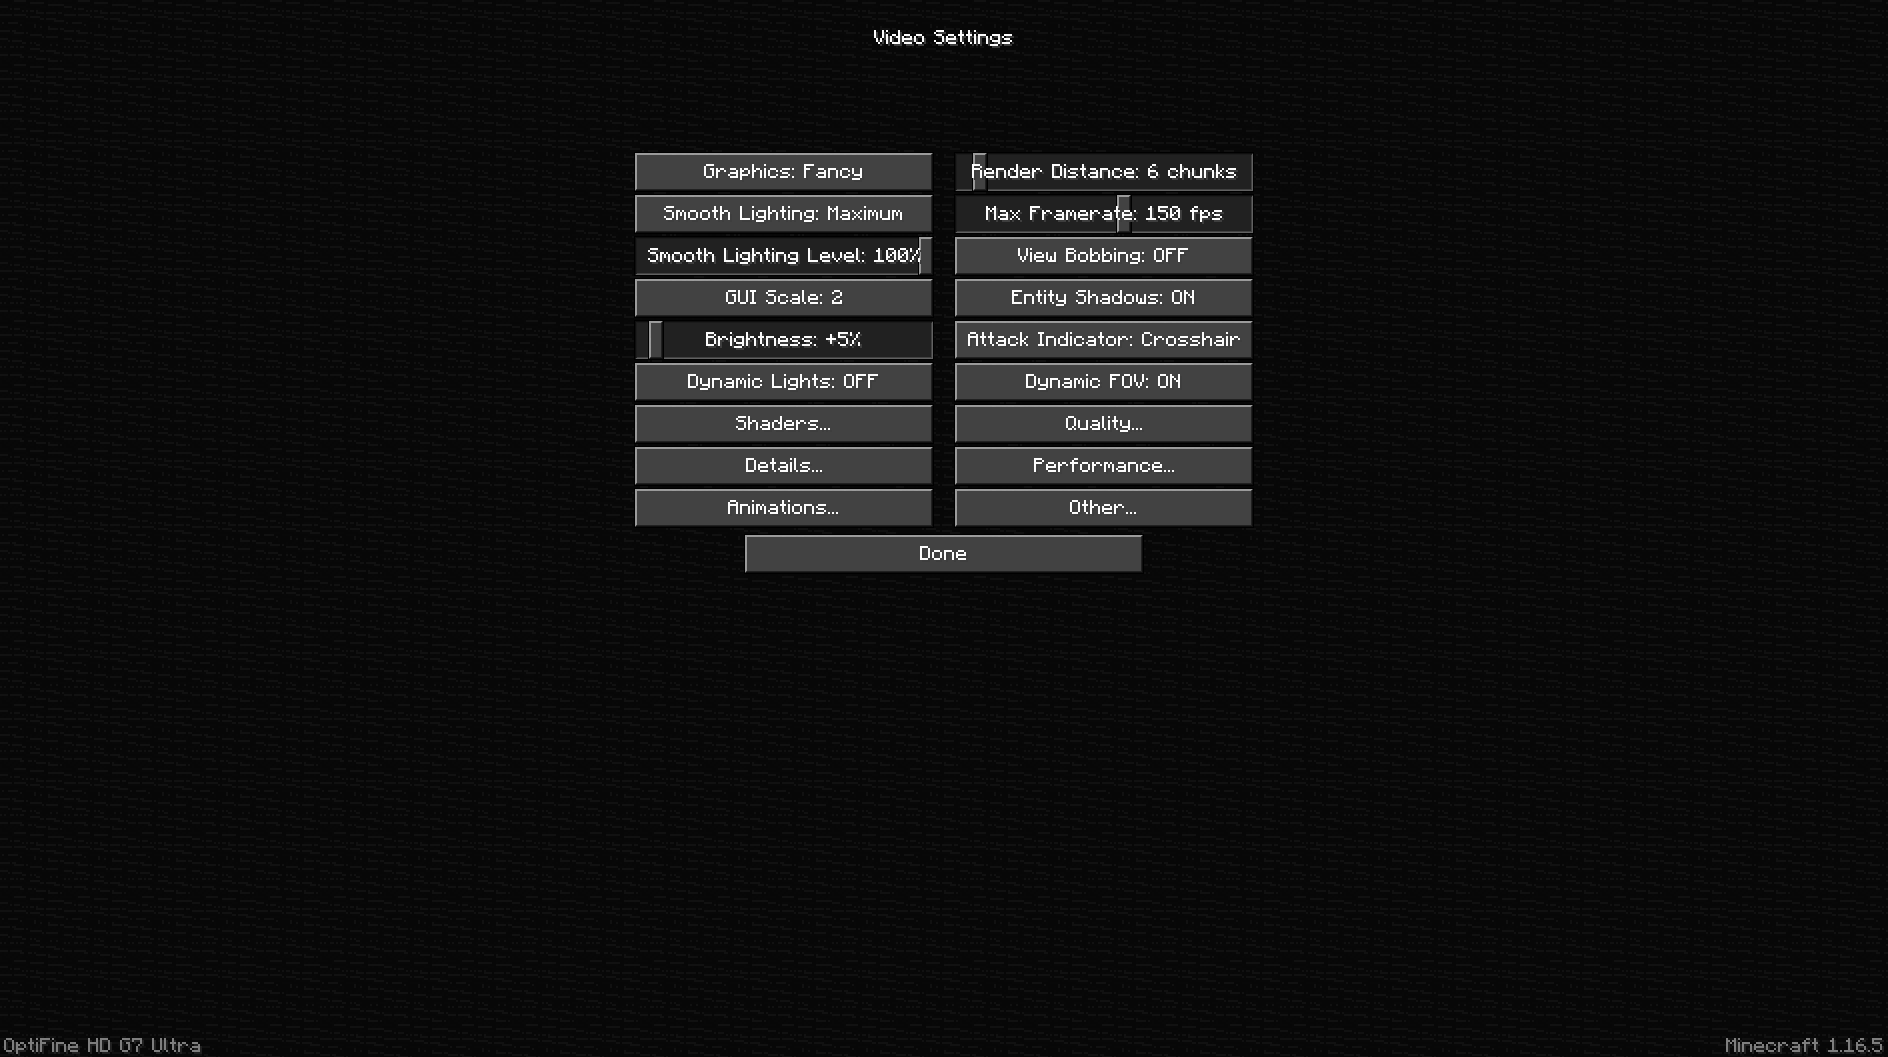 Settings page, in-game buttons example